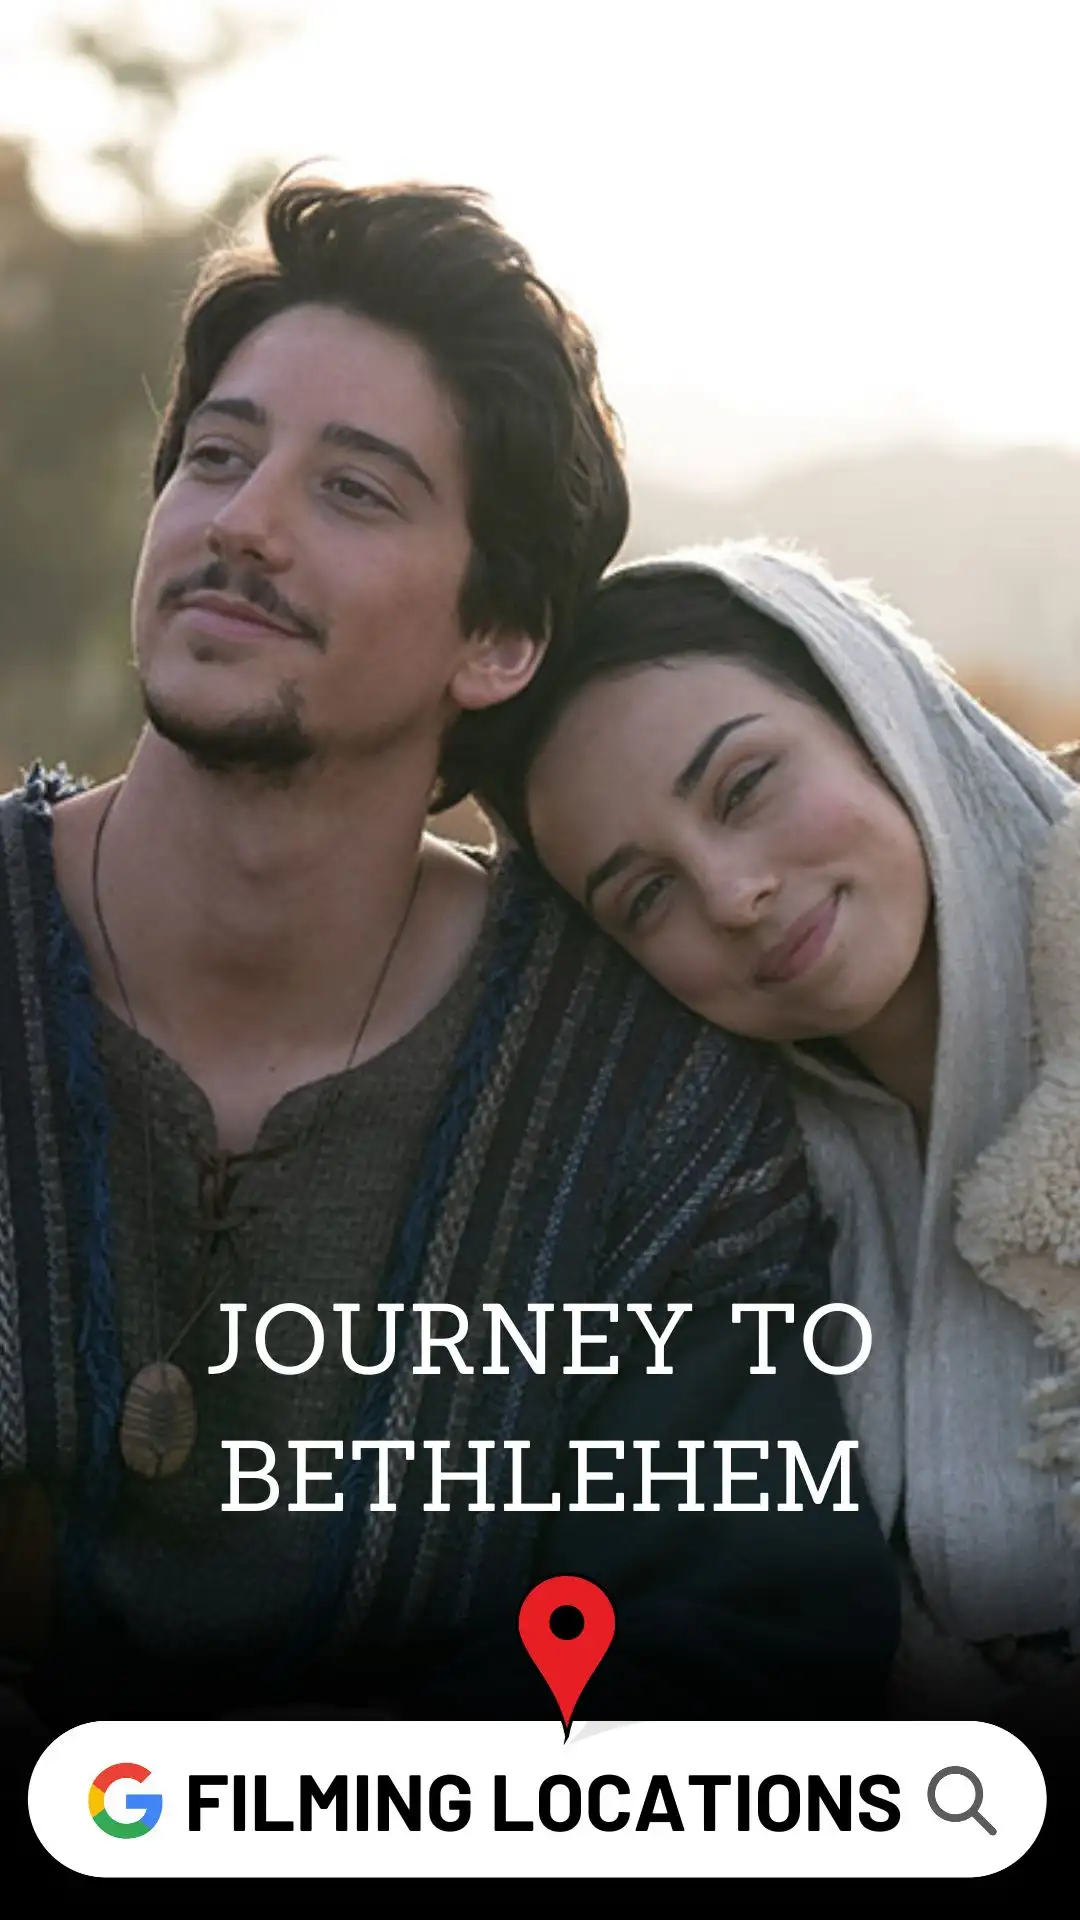 Journey to Bethlehem Filming Locations